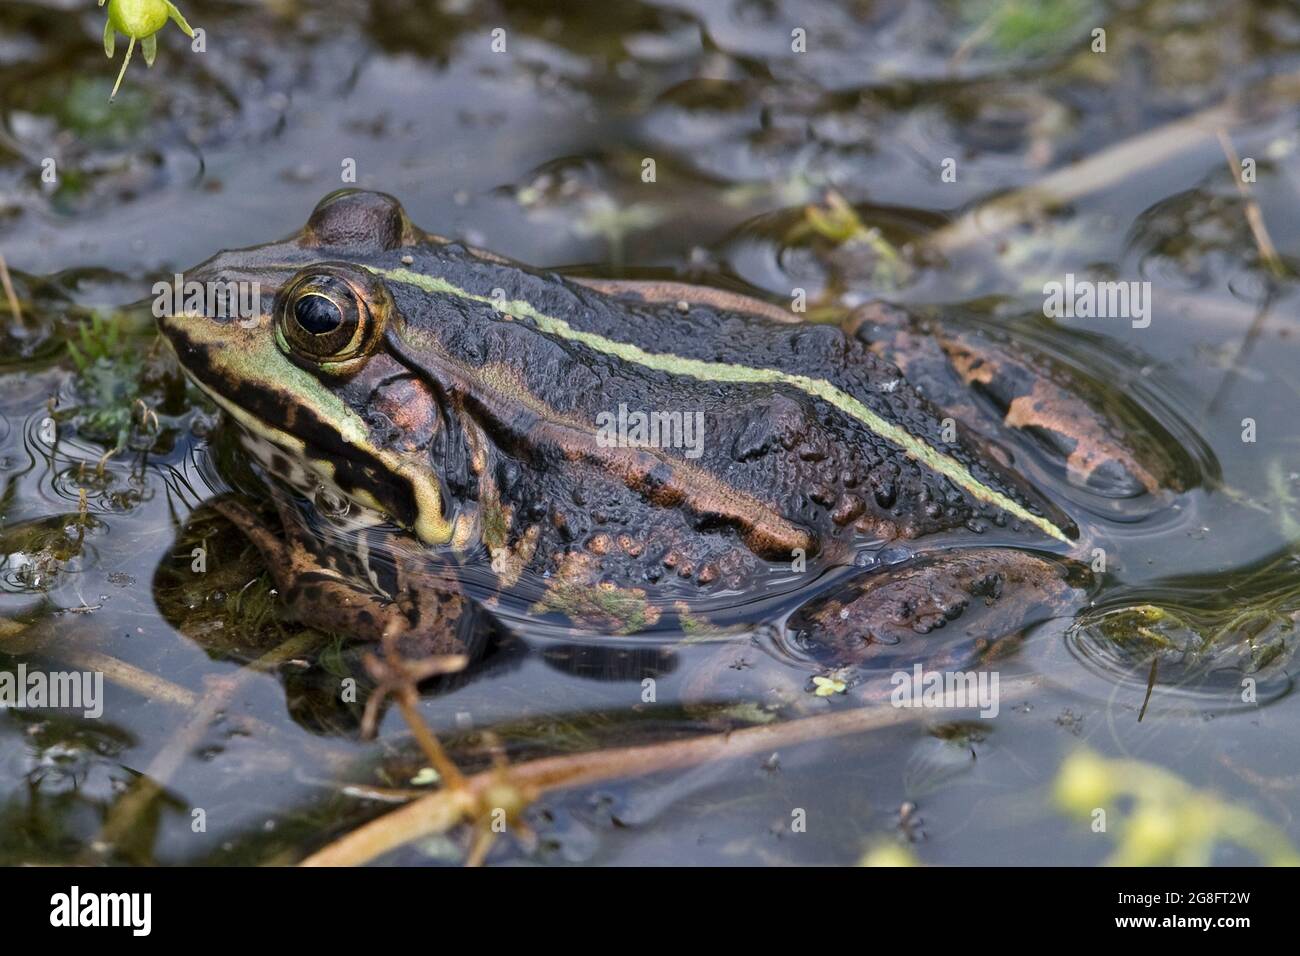 Northern Pool Frog (Pelophylax lessonae) introduced Thompson Water NWT Norfolk UK Stock Photo